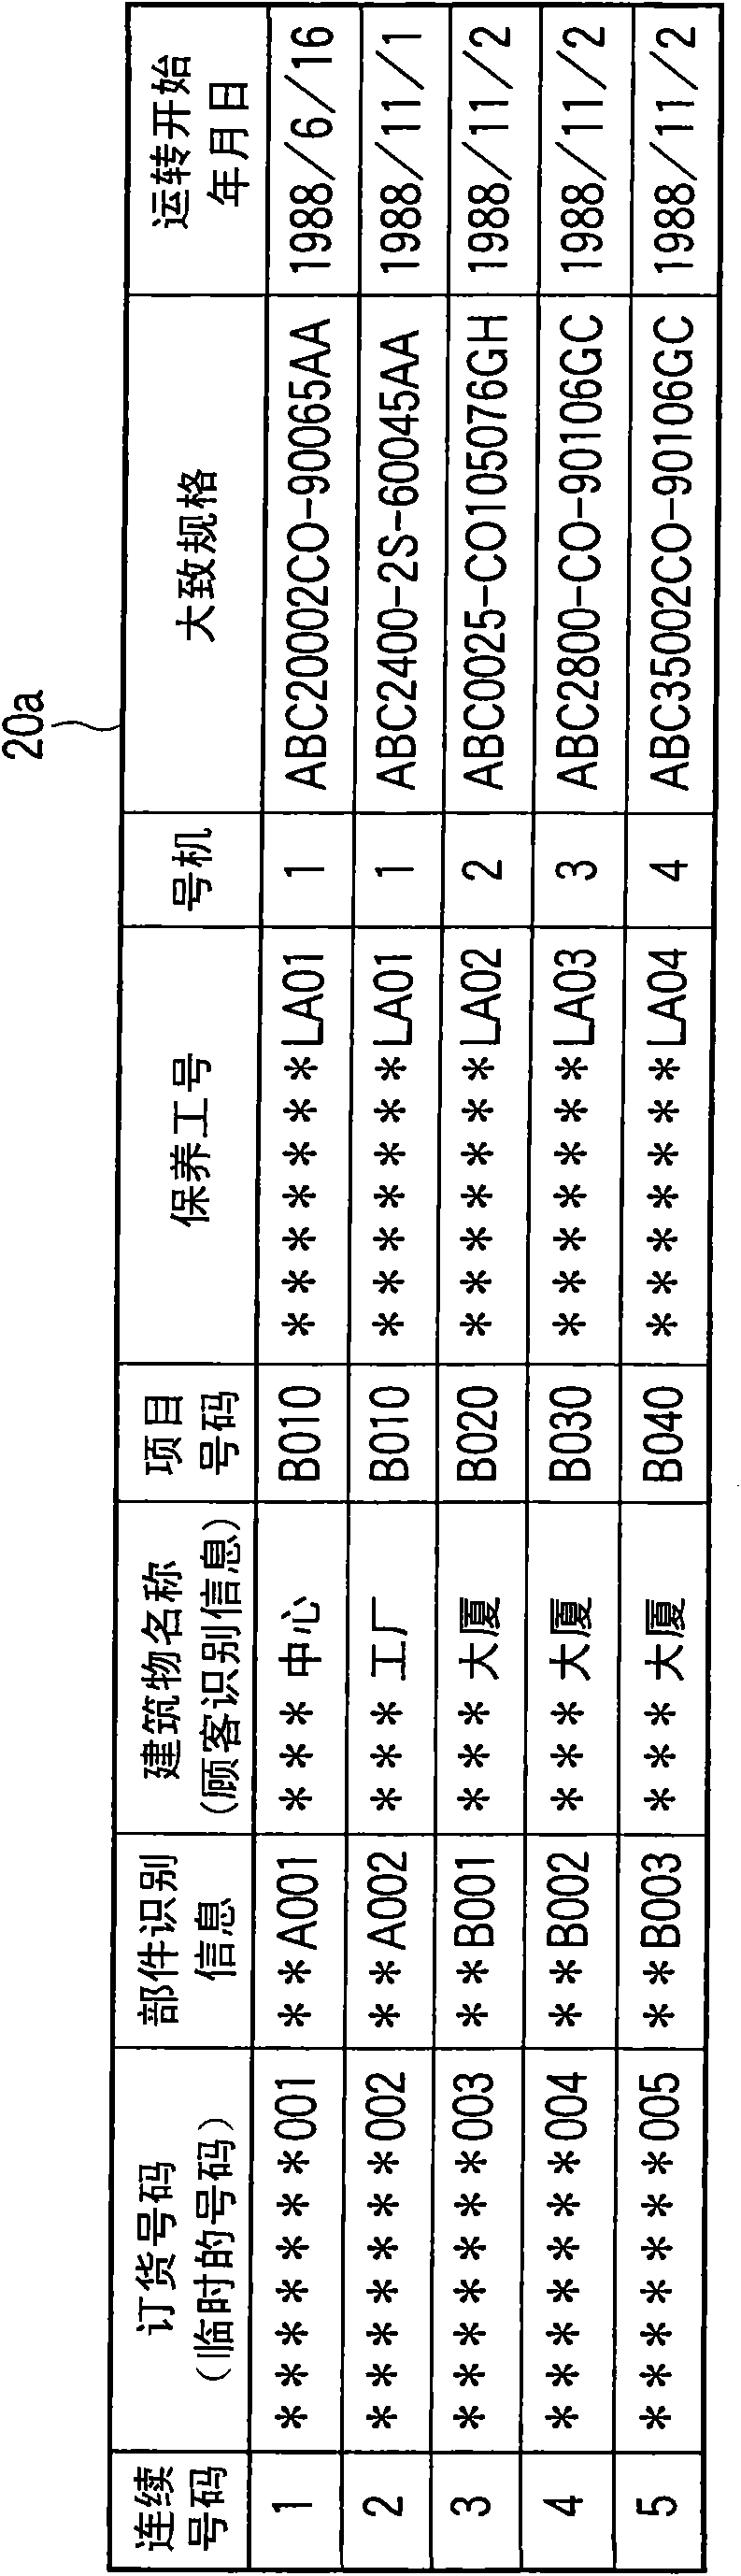 Elevator component improvement plan system and elevator component improvement plan method